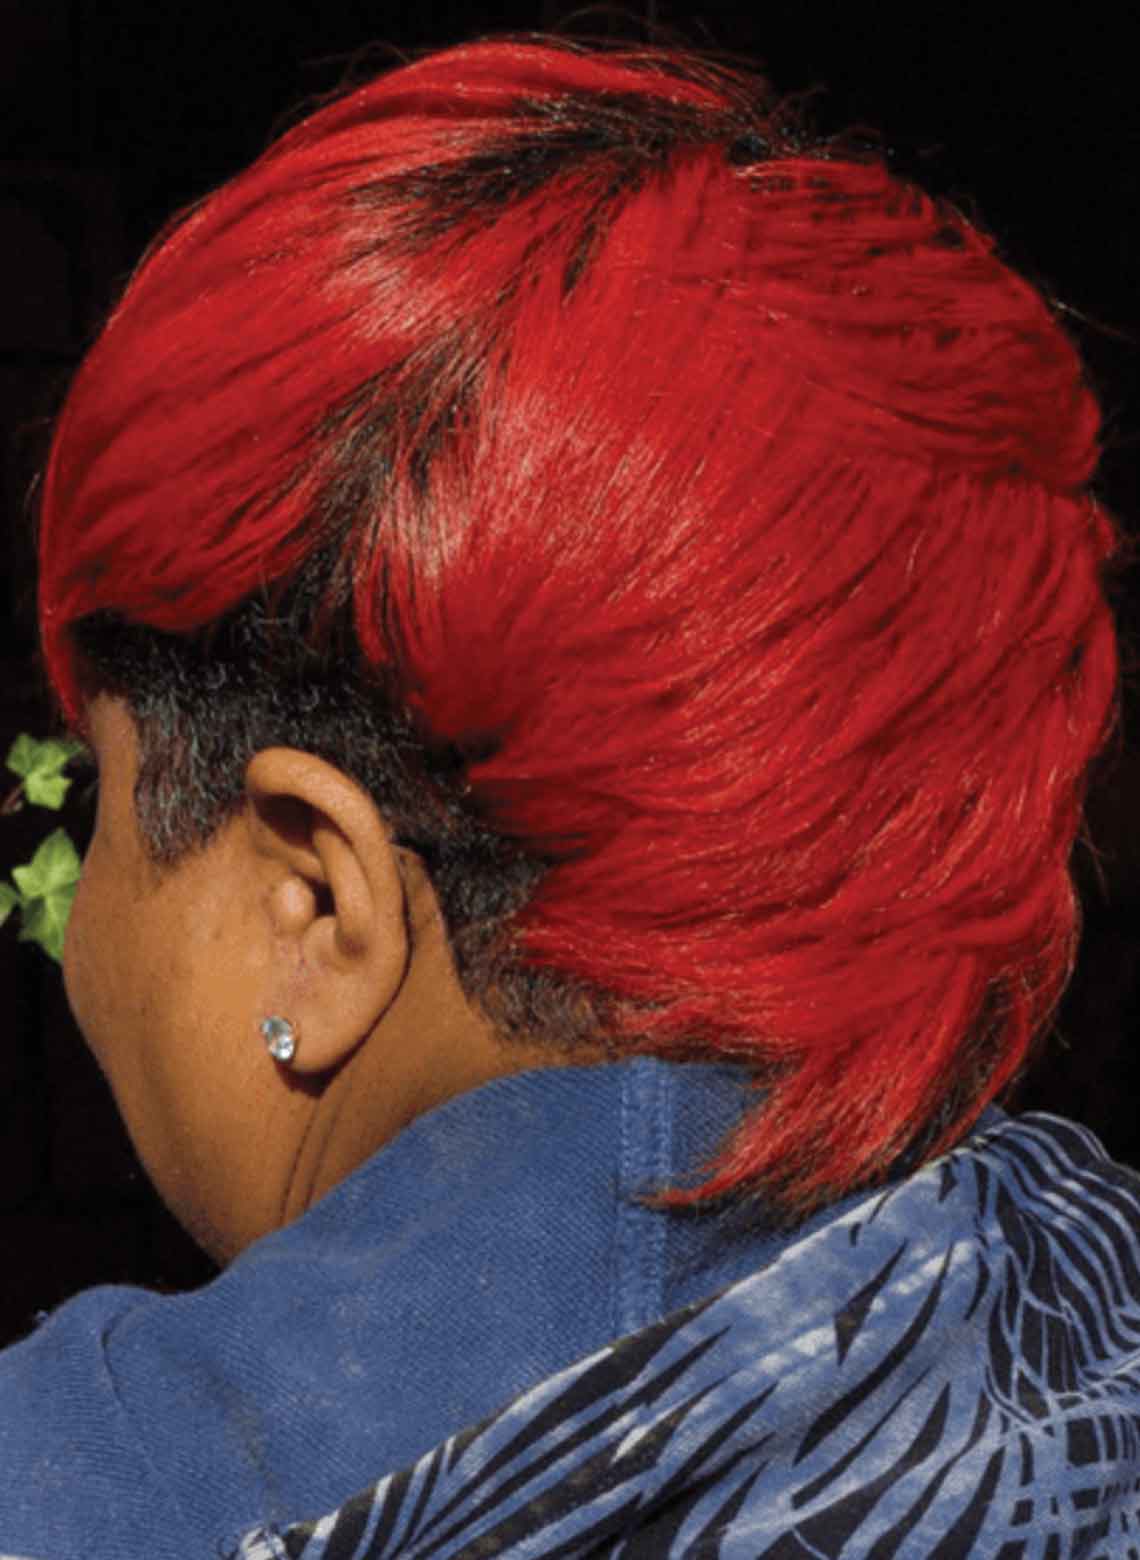 back view of person with red hair and layered mohawk, person has ear piercing in one ear